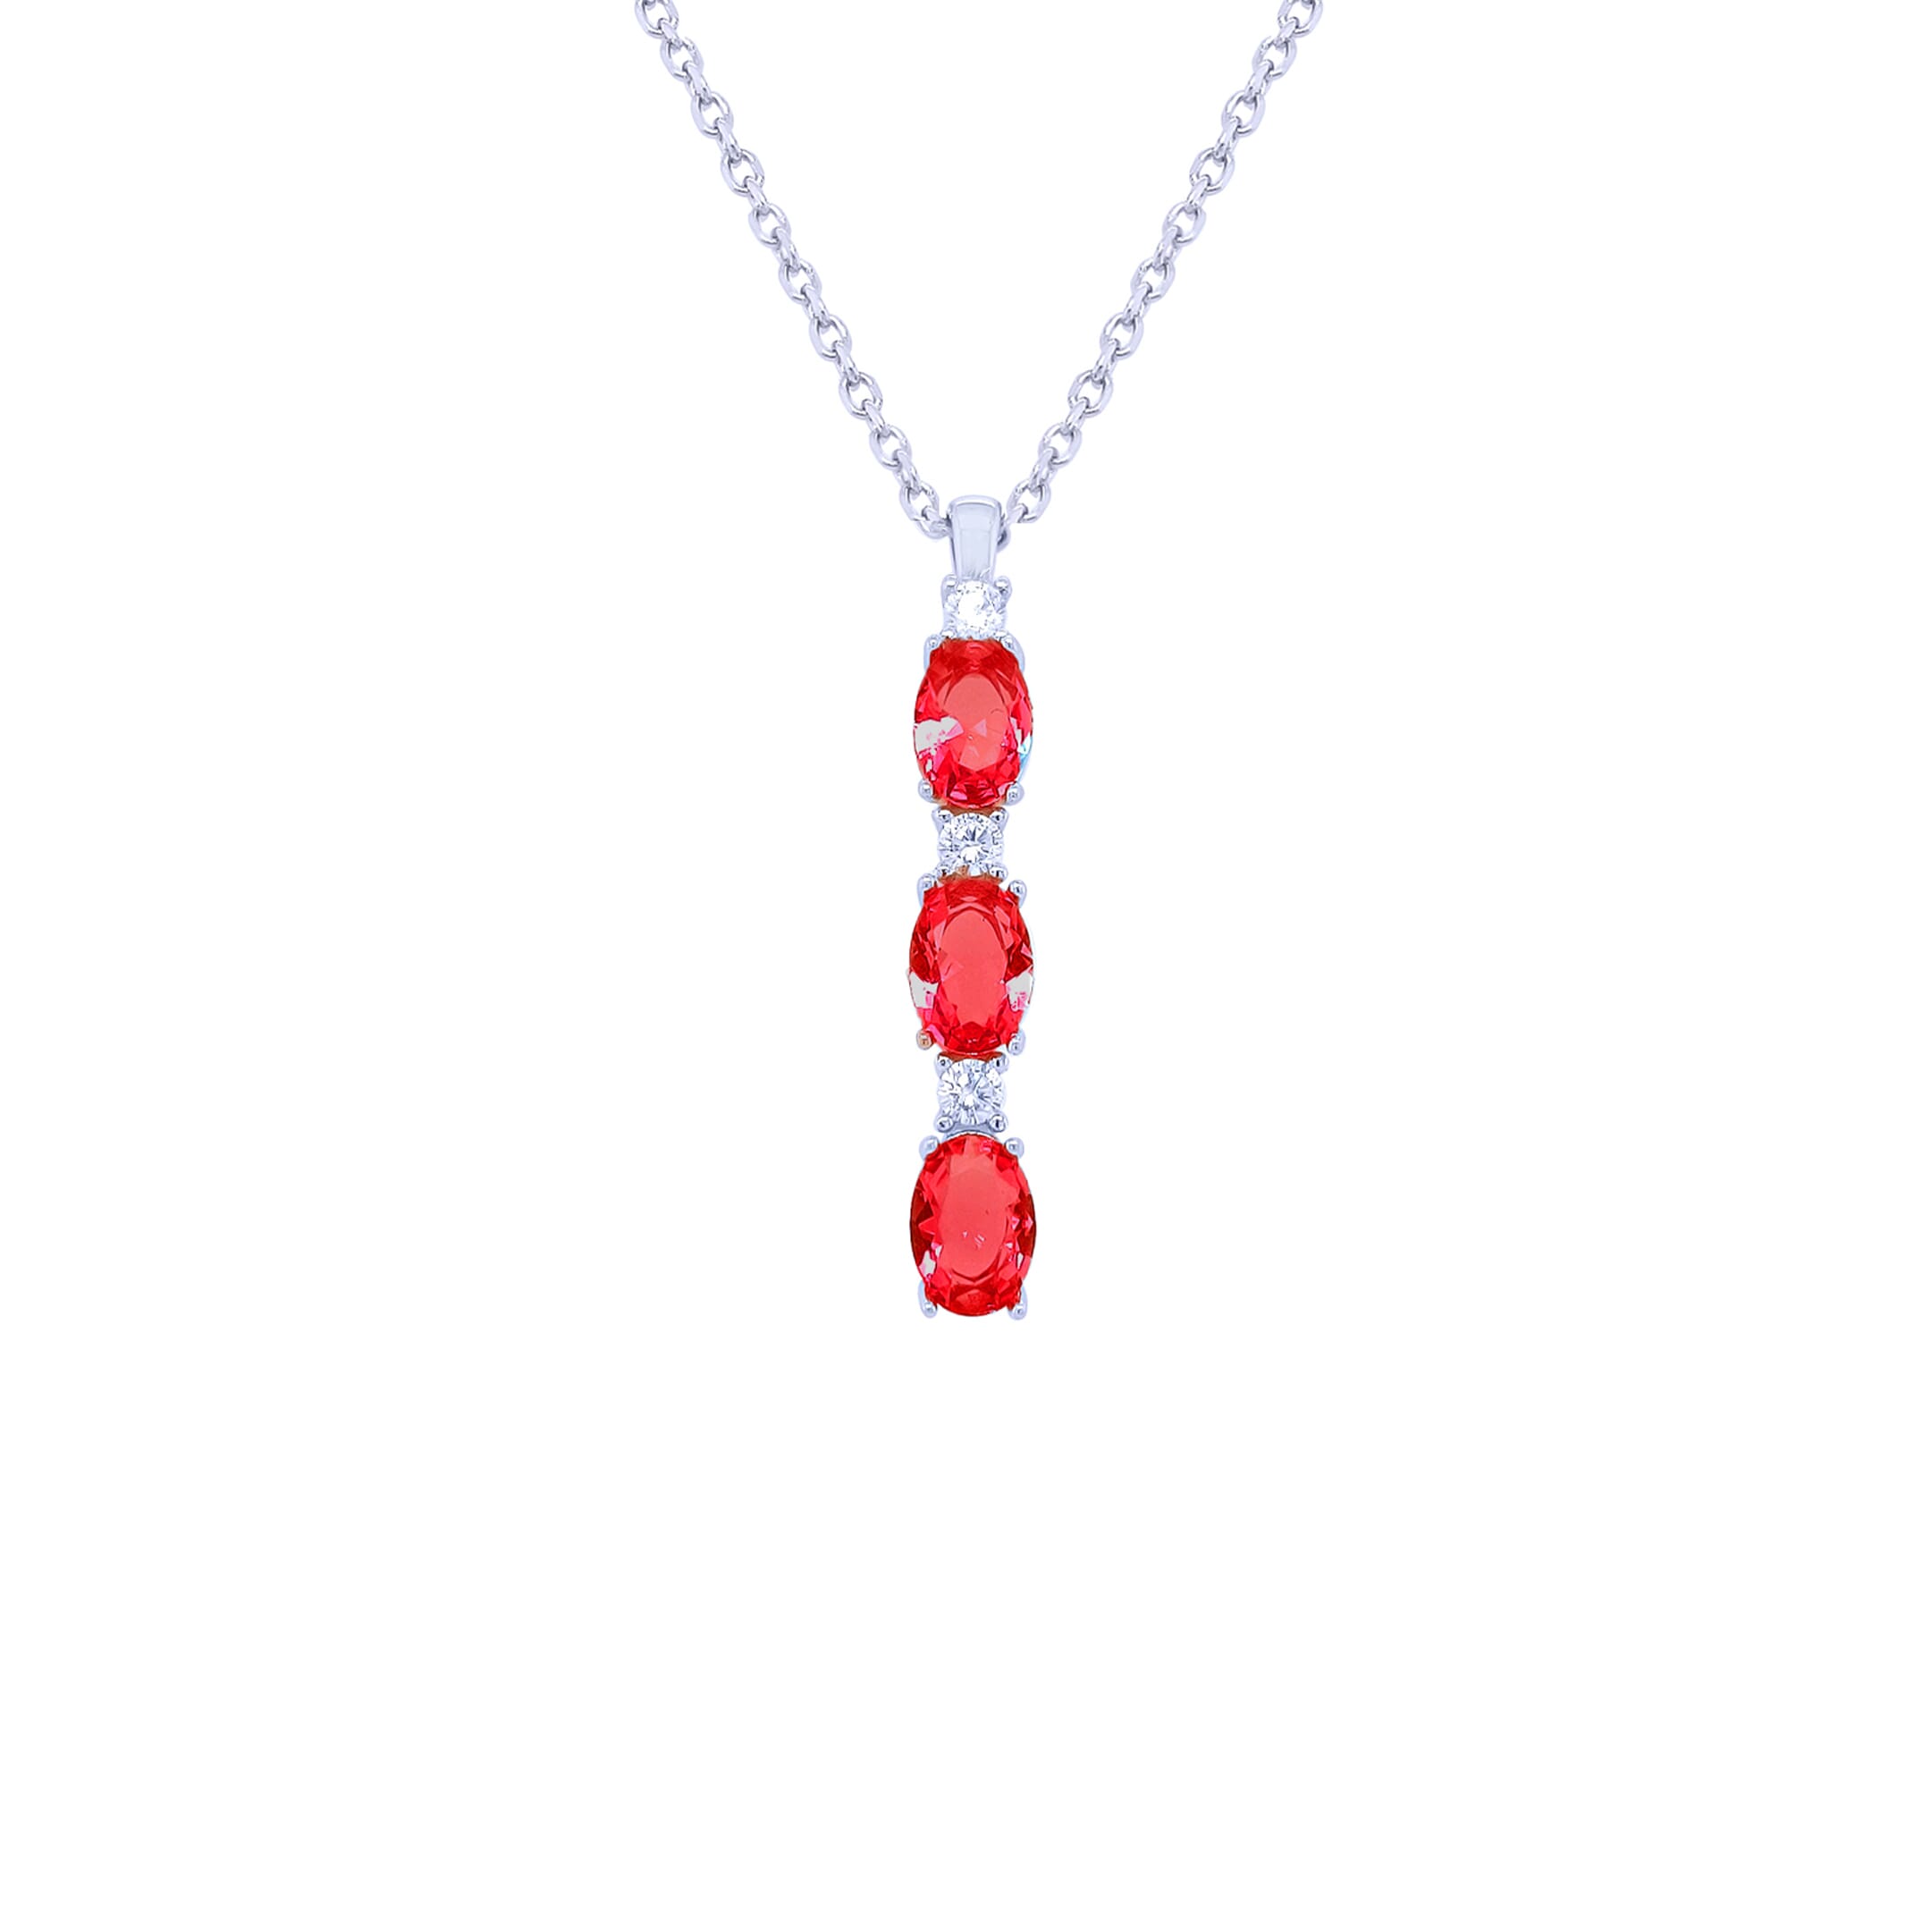 Asfour Sterling Silver 925 With A Red Oval Three-lobed Pendant